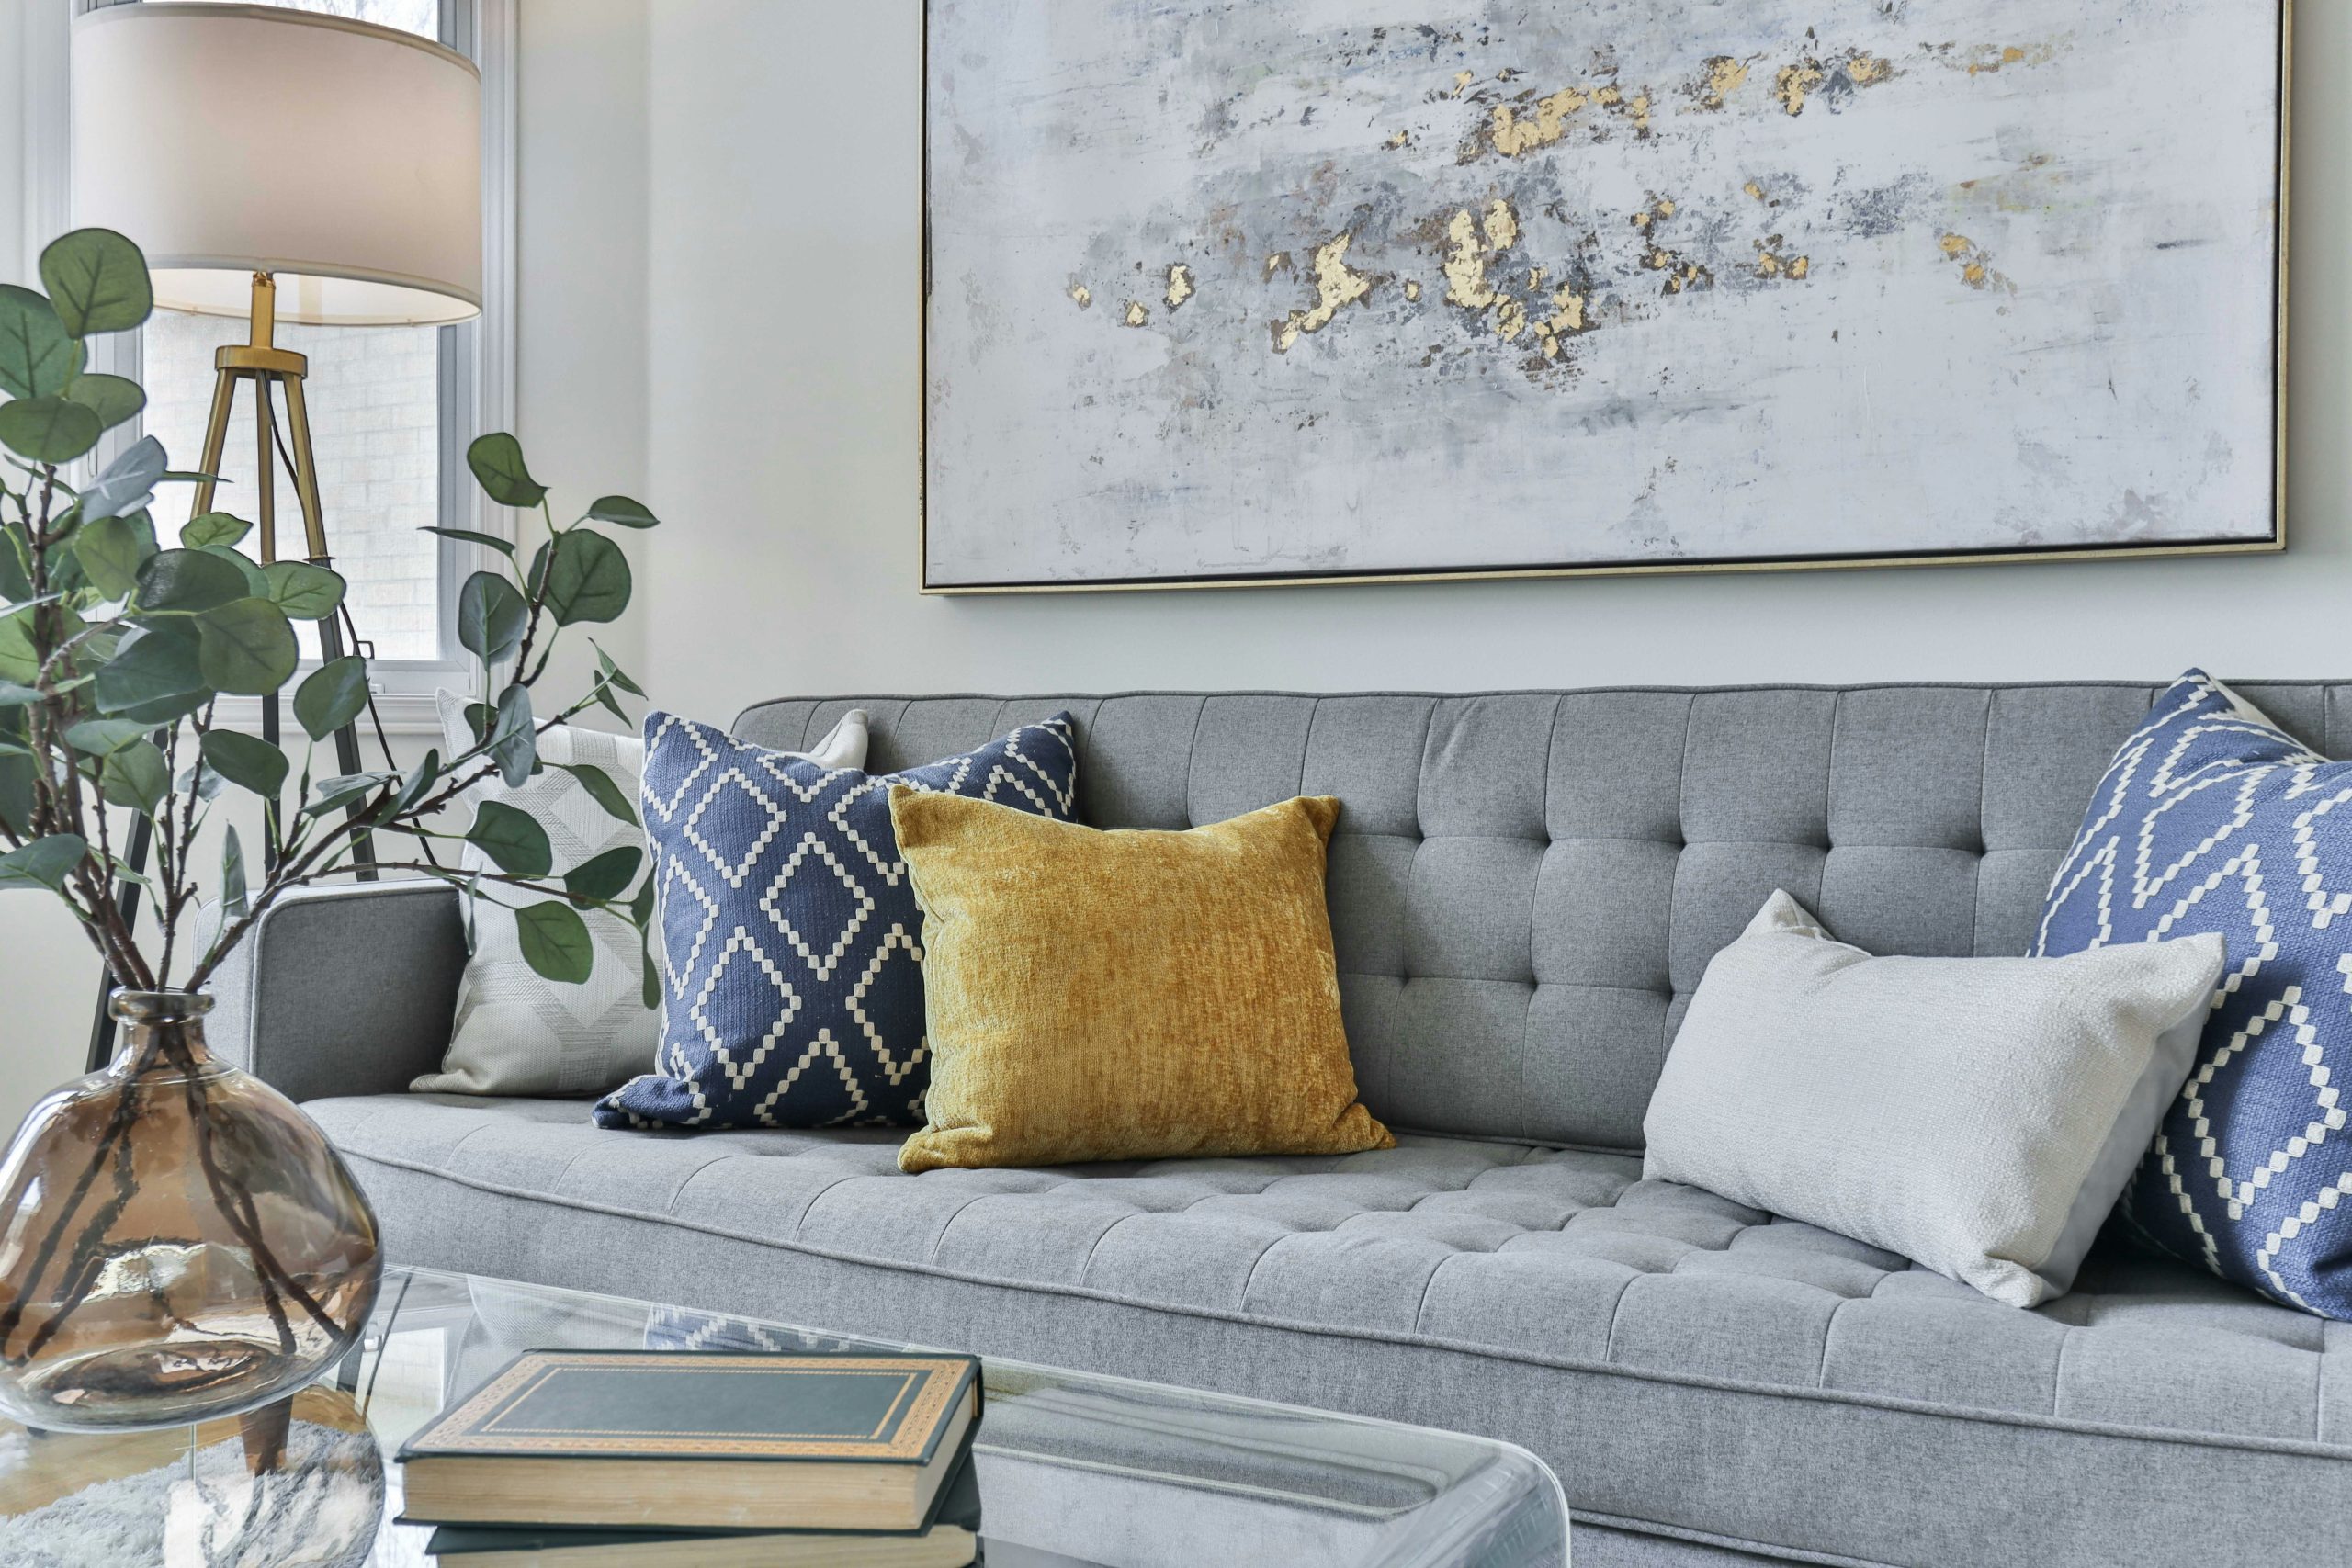 discover comfortable and stylish couches for your home. explore a wide range of designs and sizes to find the perfect fit for your living space.